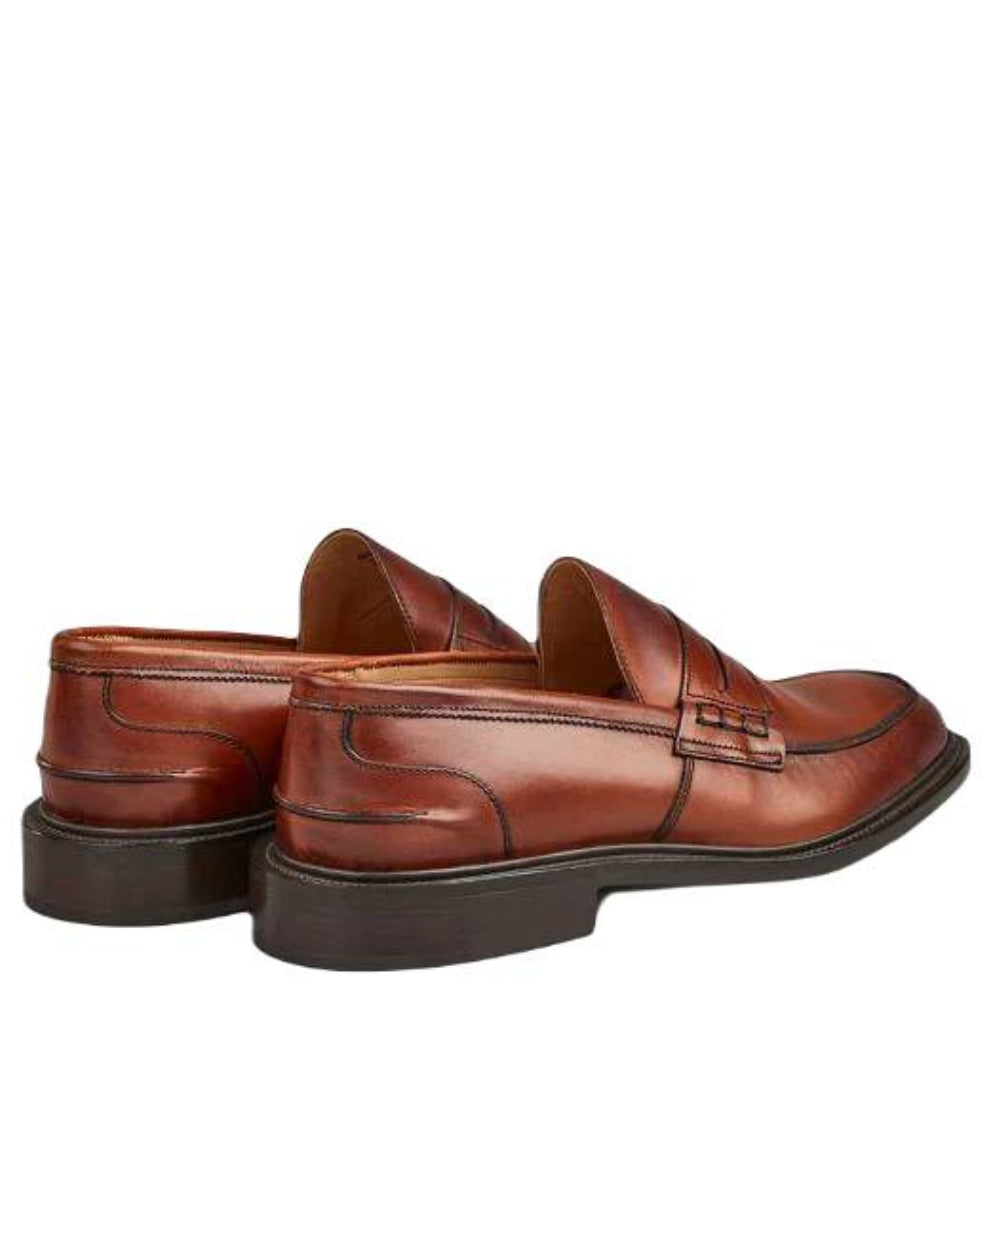 Chestnut Burnished Coloured Trickers James Leather Sole Penny Loafer On A White Background 